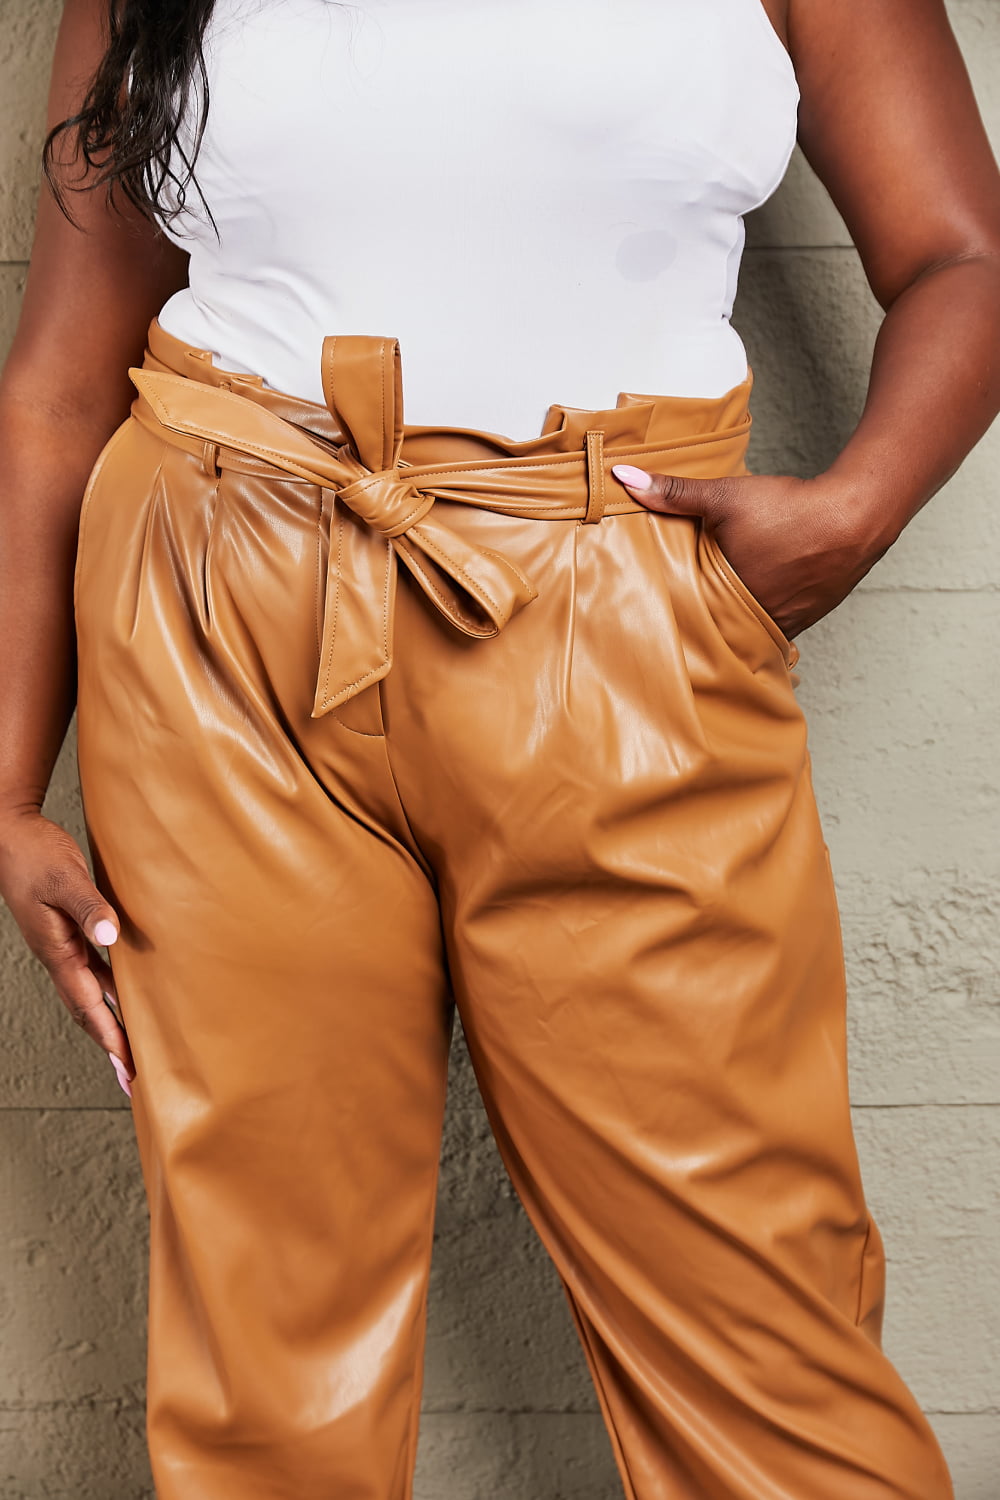 HEYSON "Powerful You" Faux Leather Paperbag Pants